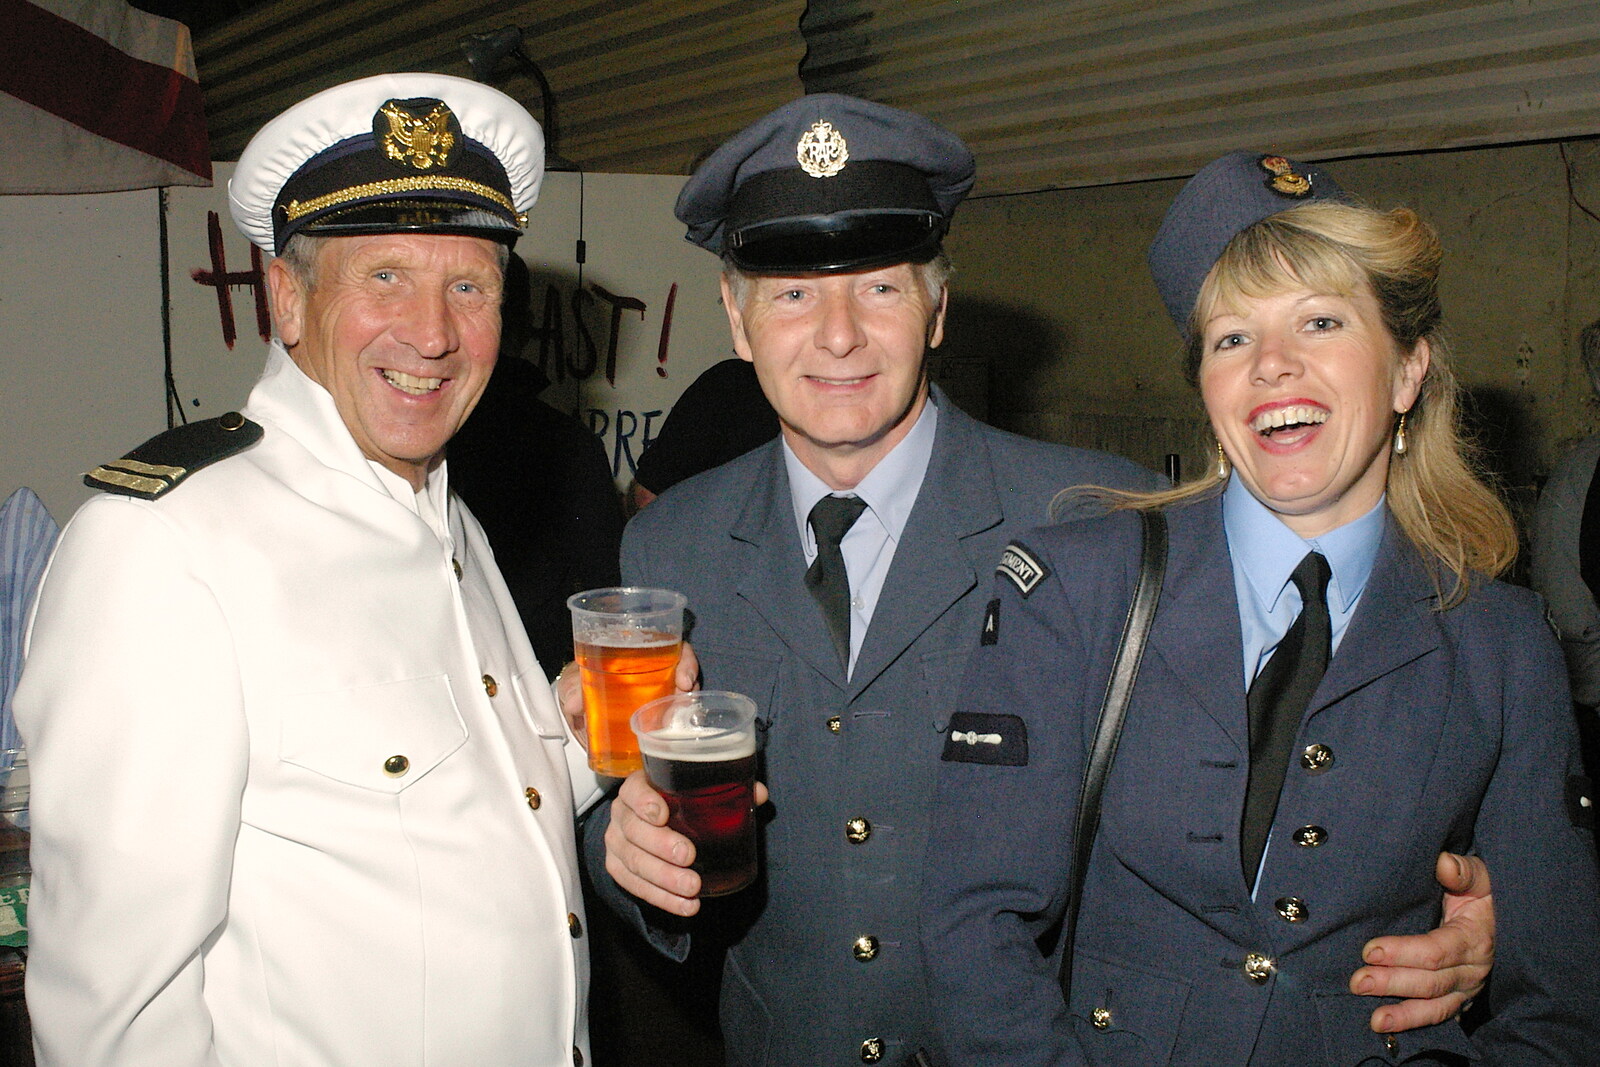 The Captain and the RAF from A 1940s VE Dance At Debach Airfield, Debach, Suffolk - 11th June 2005